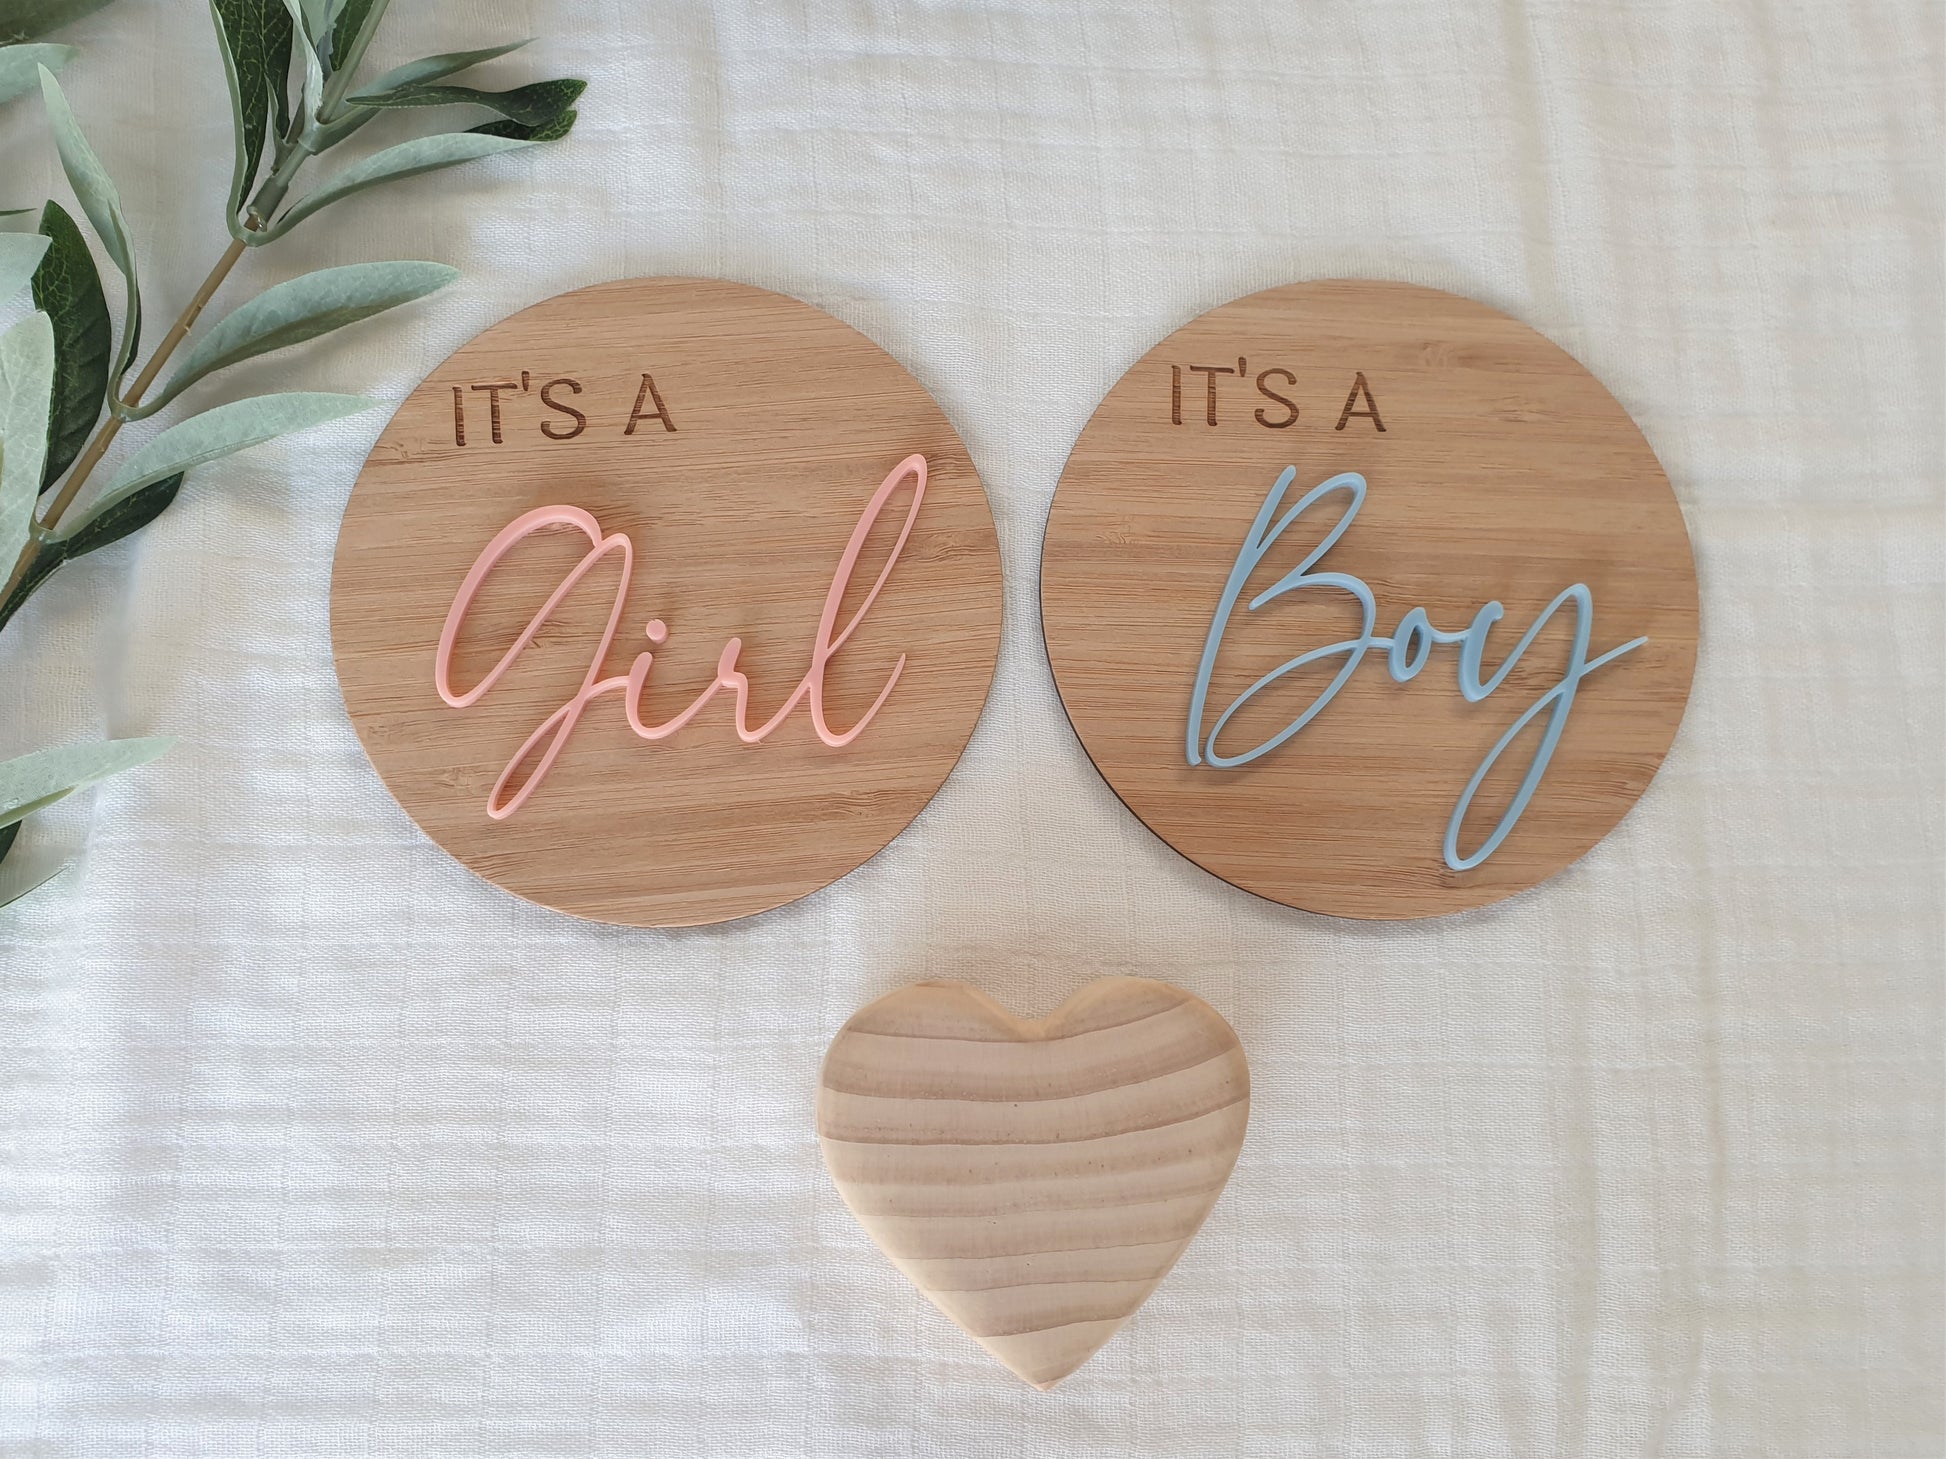 It's A Boy & It's A Girl Plaques - Bamboo  Miss Ali's Set of 2 - Boy & Girl  